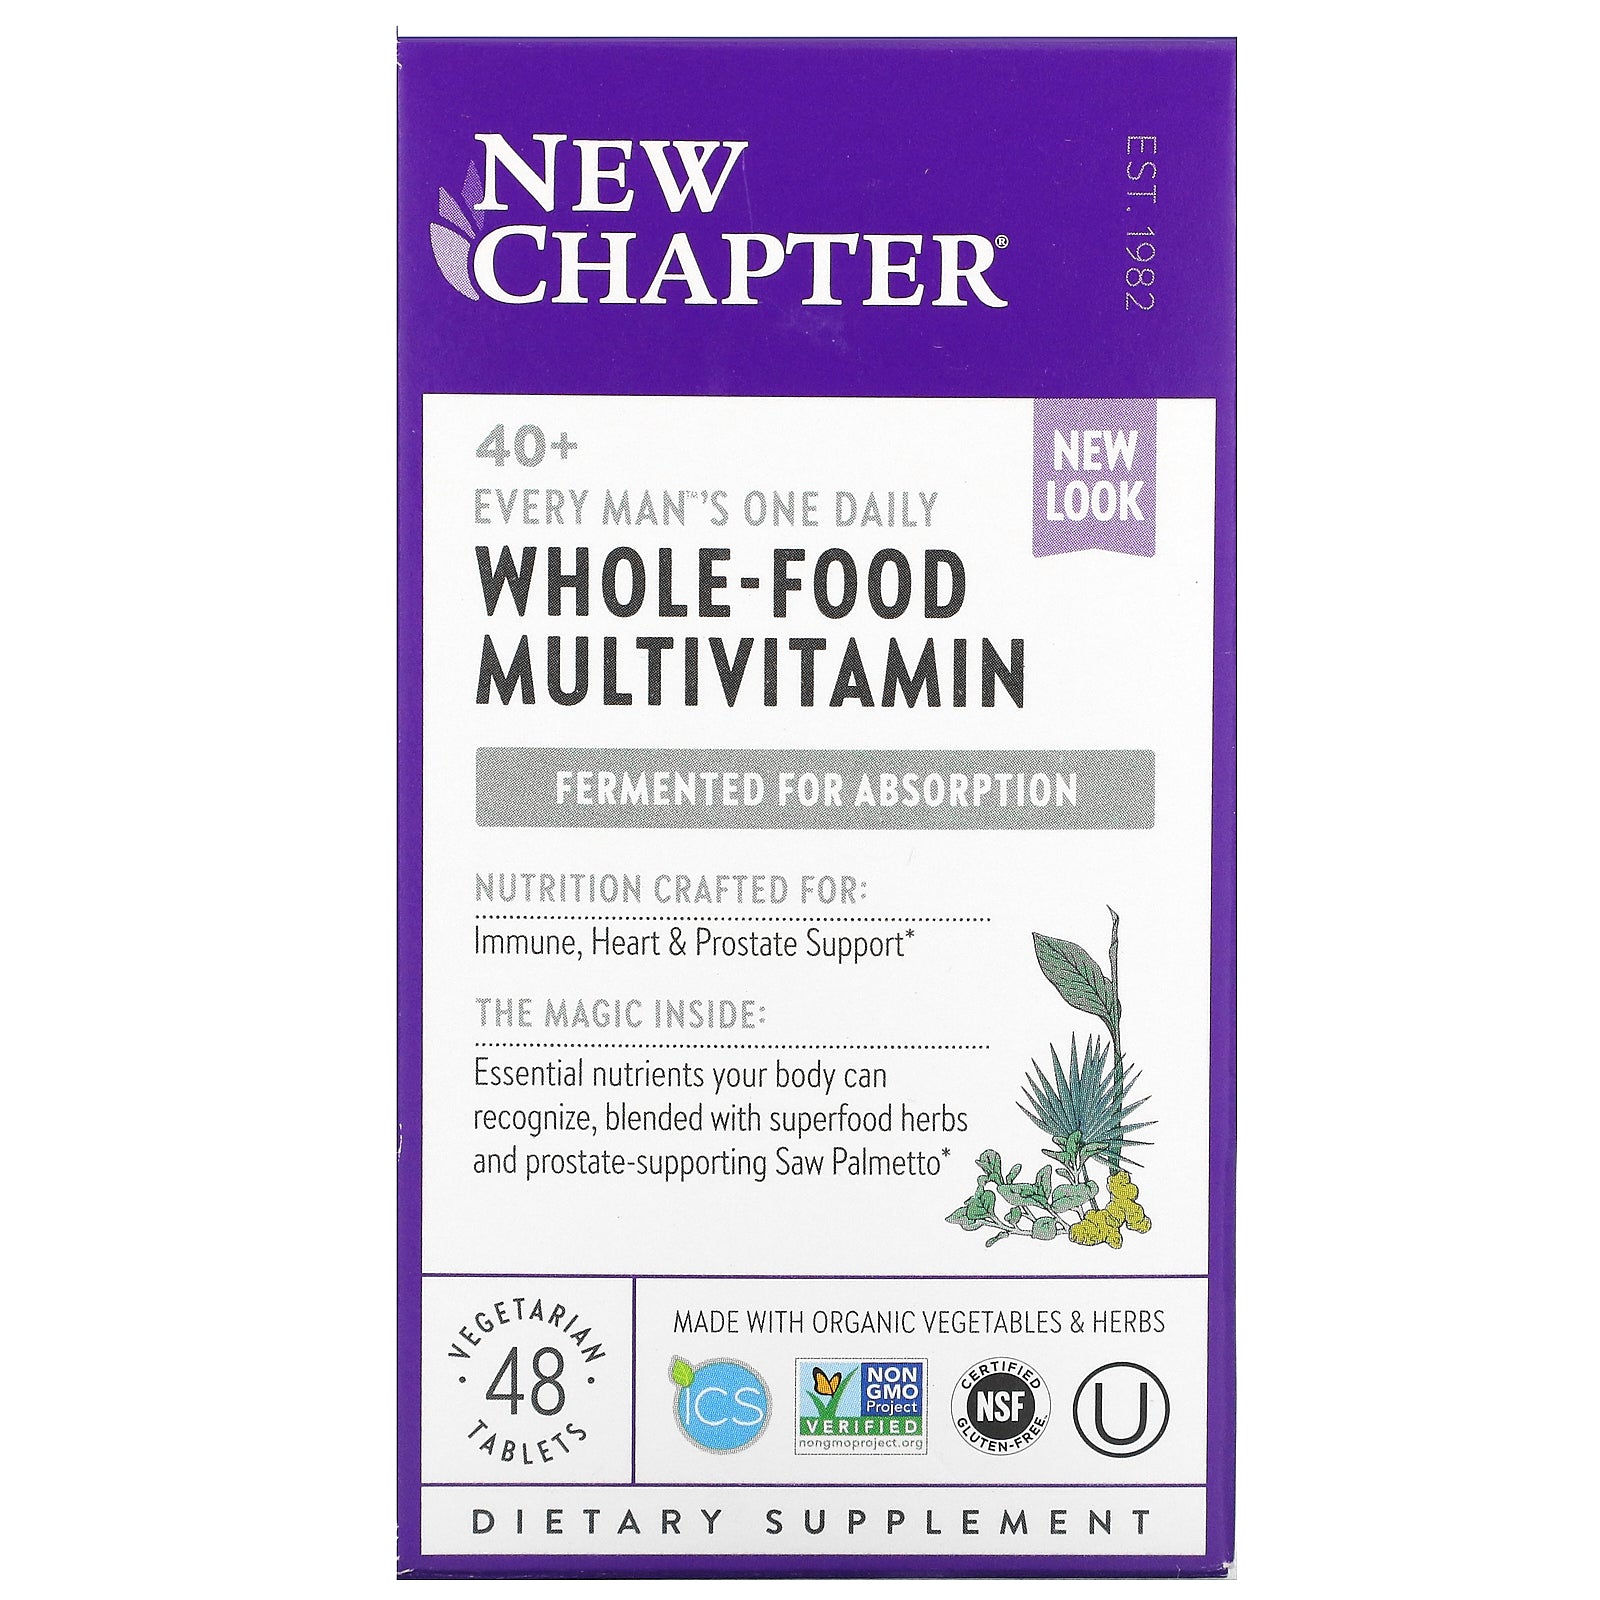 New Chapter, 40+ Every Man's One Daily, Whole-Food Multivitamin, 48 Vegetarian Tablets